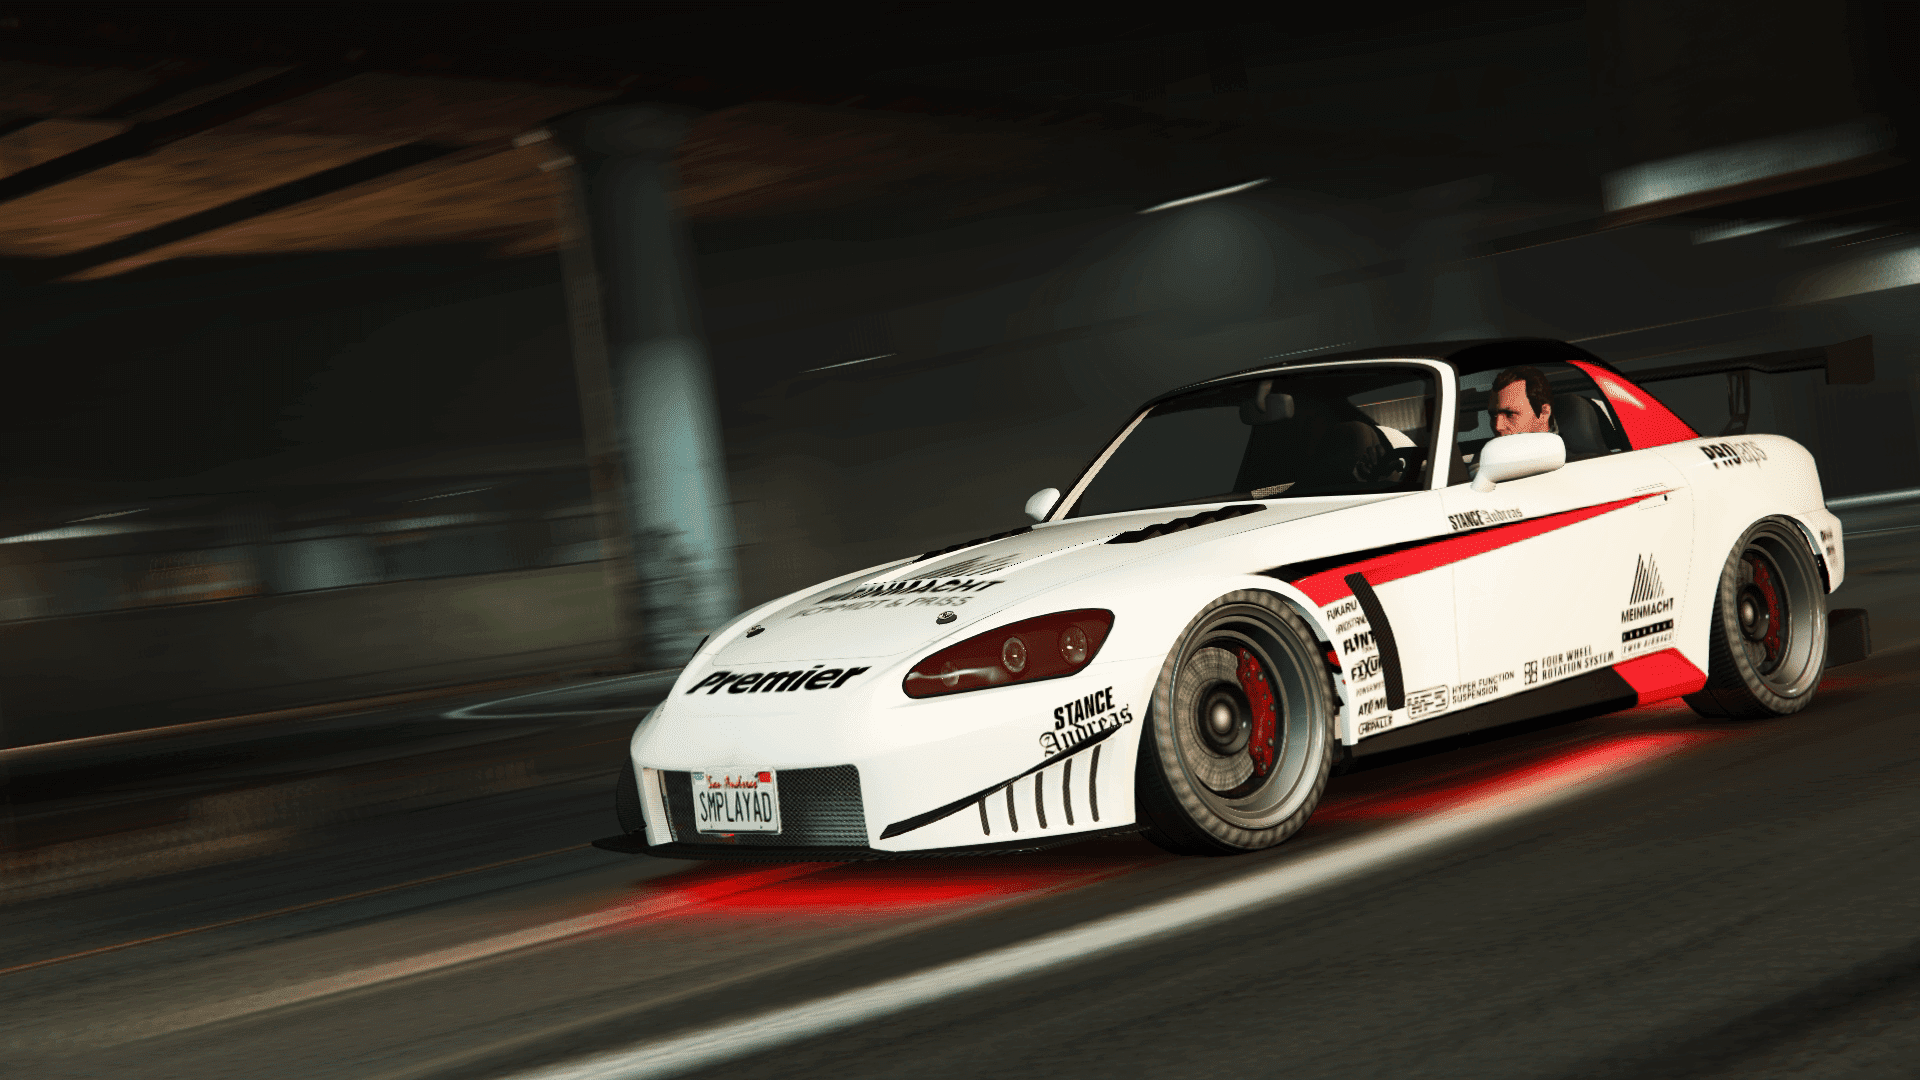 (HD) This Dinka RT3000 plays the role of a street racing demon that haunts the test track 2